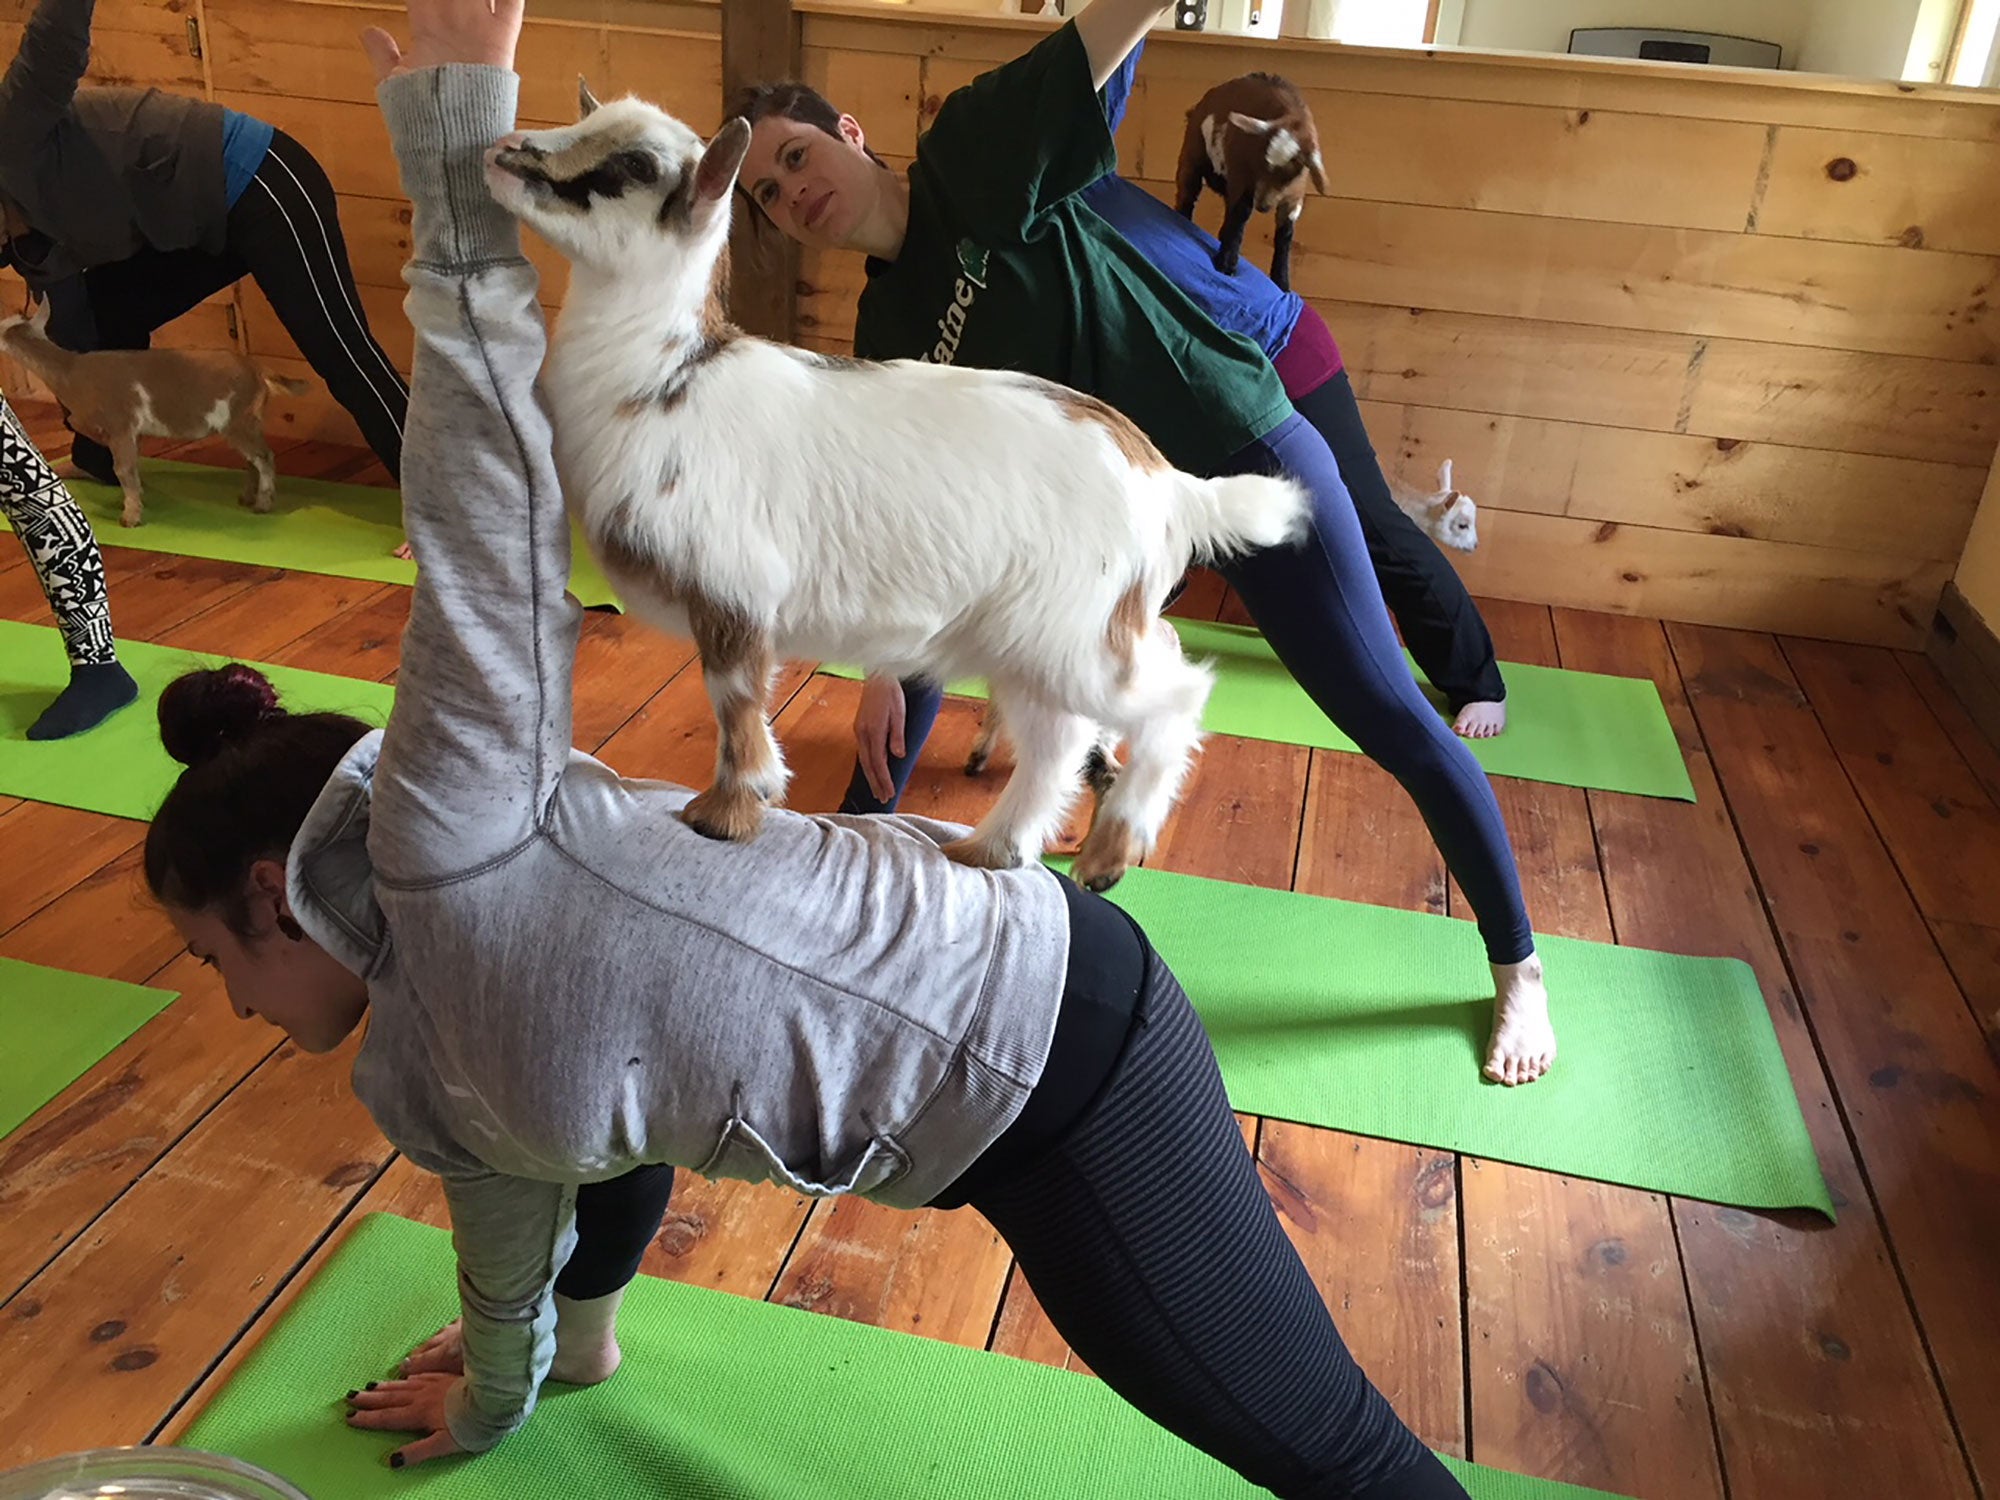 Goat yoga The quirky way to connect with farm life AGDAILY